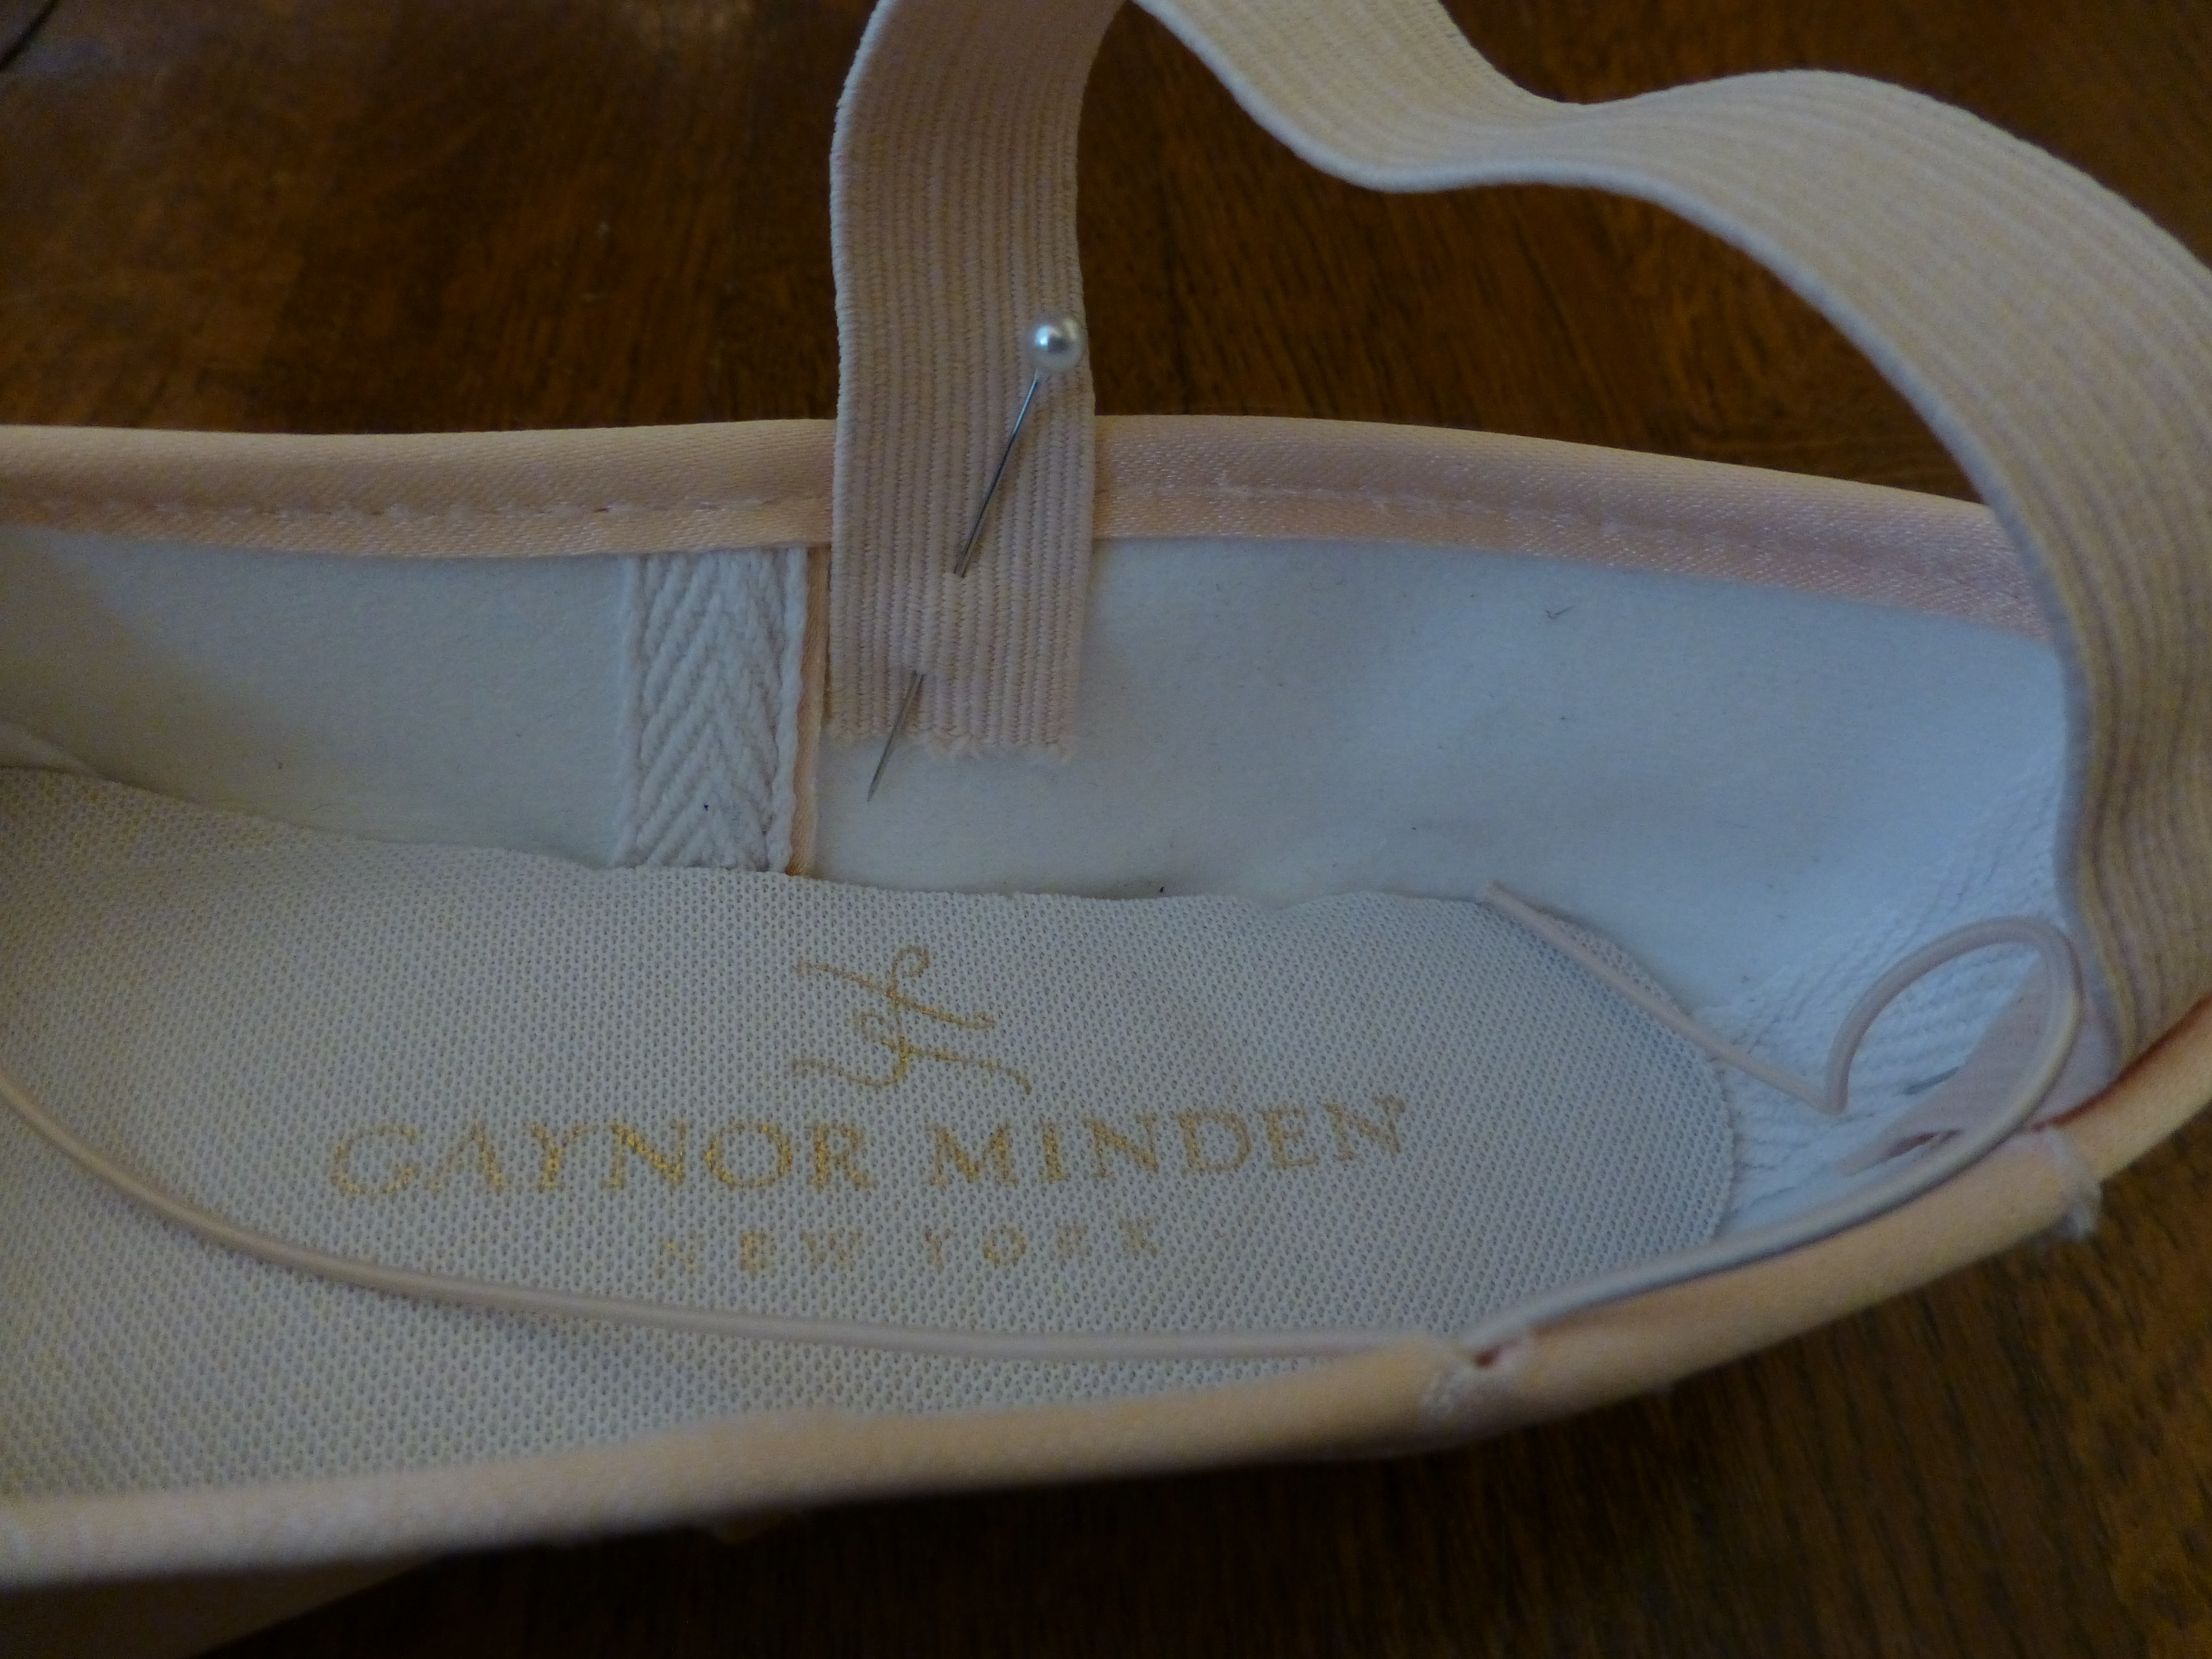 How to sew pointe shoes: criss cross elastic placement – Dance Insight